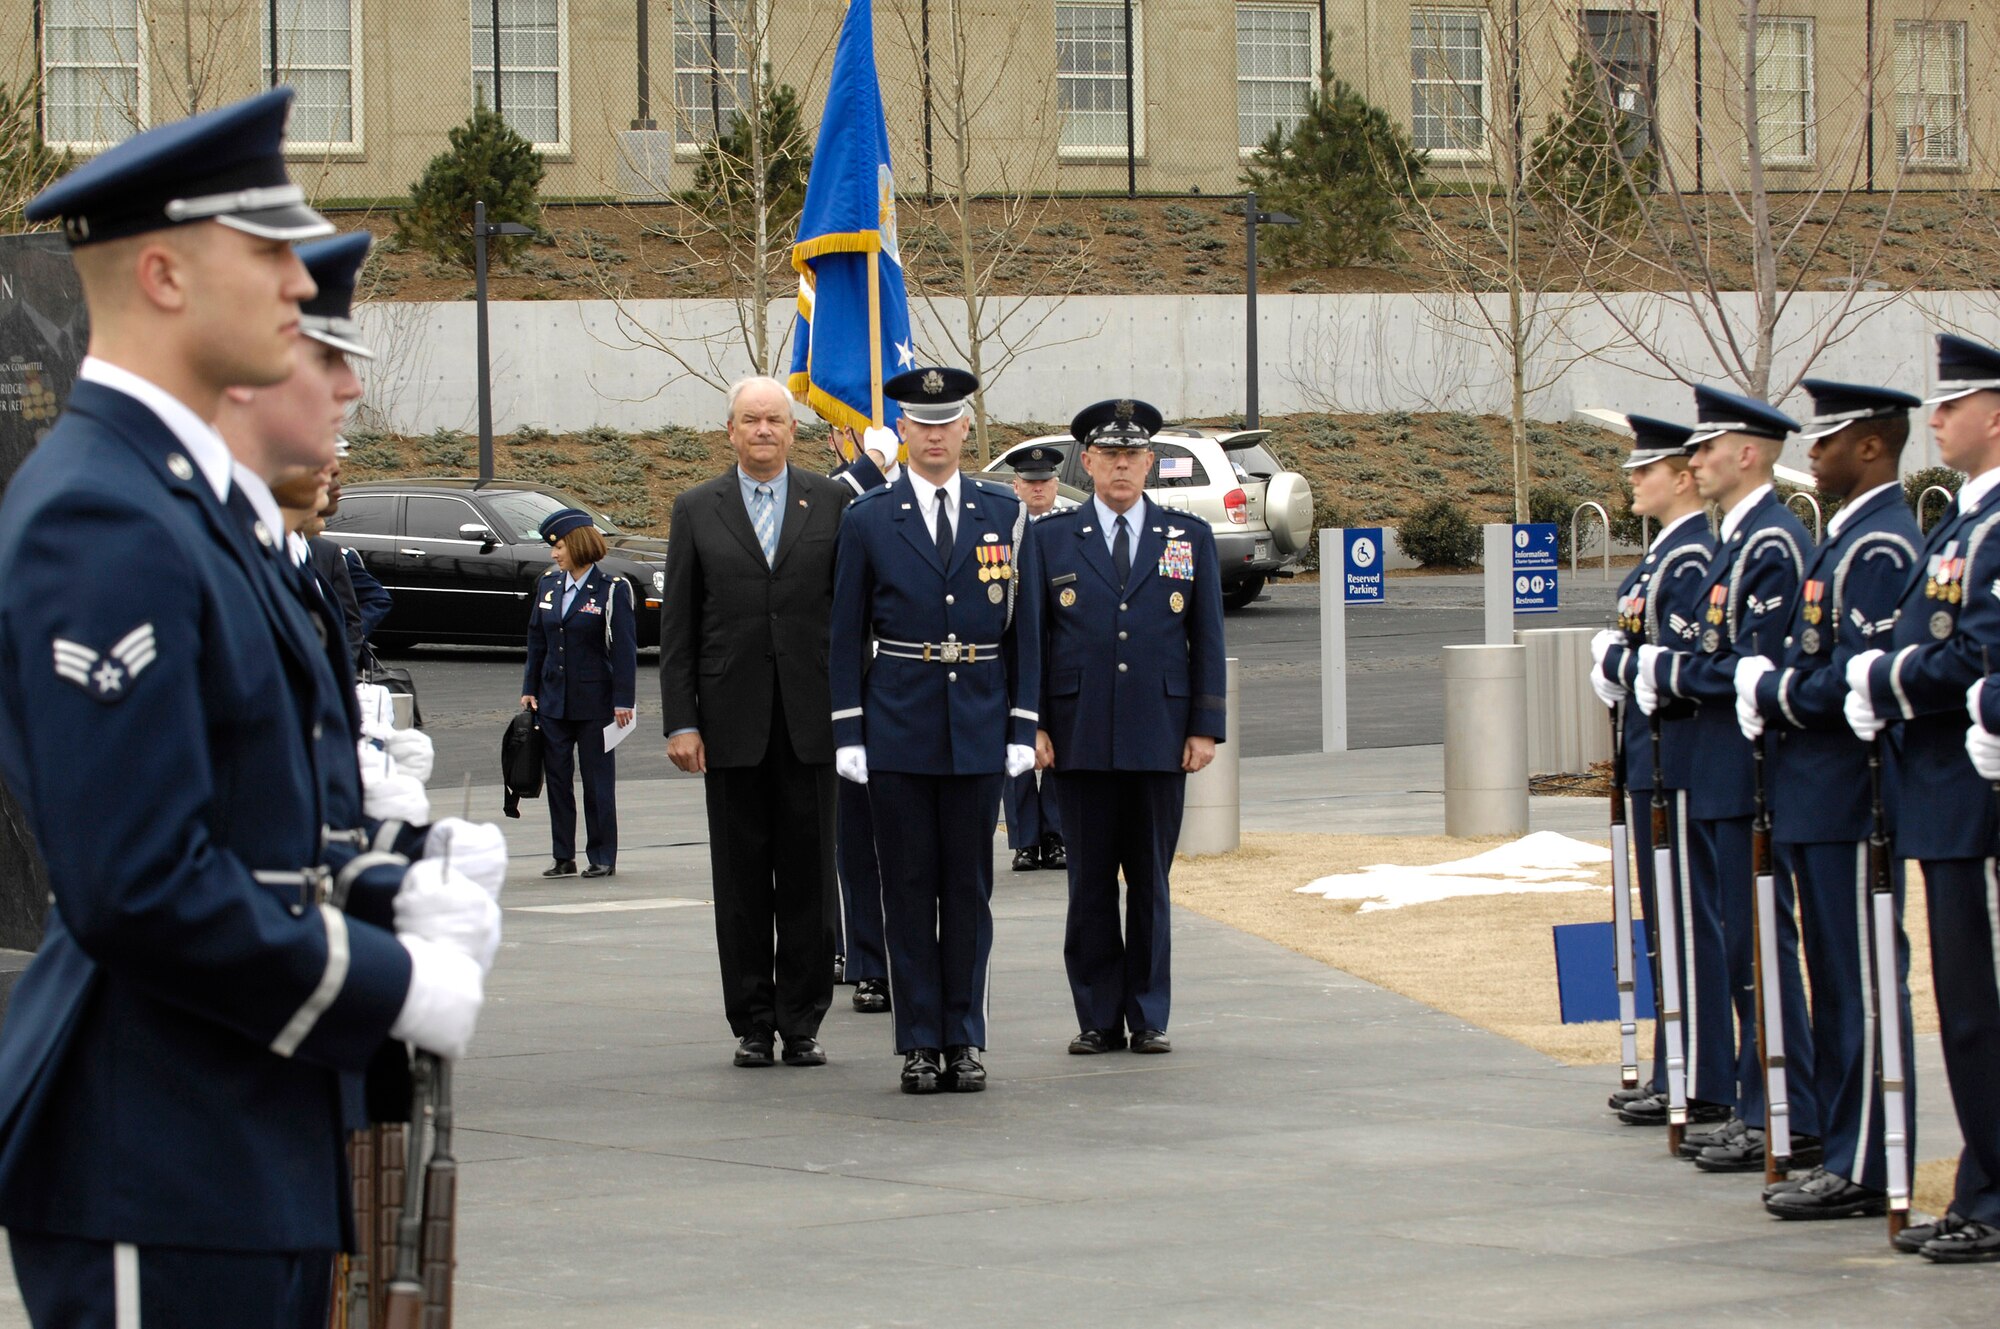 Secretary of the Air Force Michael W. Wynne and Air Force Chief of Staff Gen. T. Michael Moseley are escorted to the base of the Air Force Memorial in Arlington, Va., March 1 for a ceremony in which the Air Force's 60th Anniversary flag was unveiled.  The flag will fly at the Air Force memorial until the Air Force's 60th birthday on Sep 18.  (U.S. Air Force photo/Senior Airman Daniel R. DeCook)